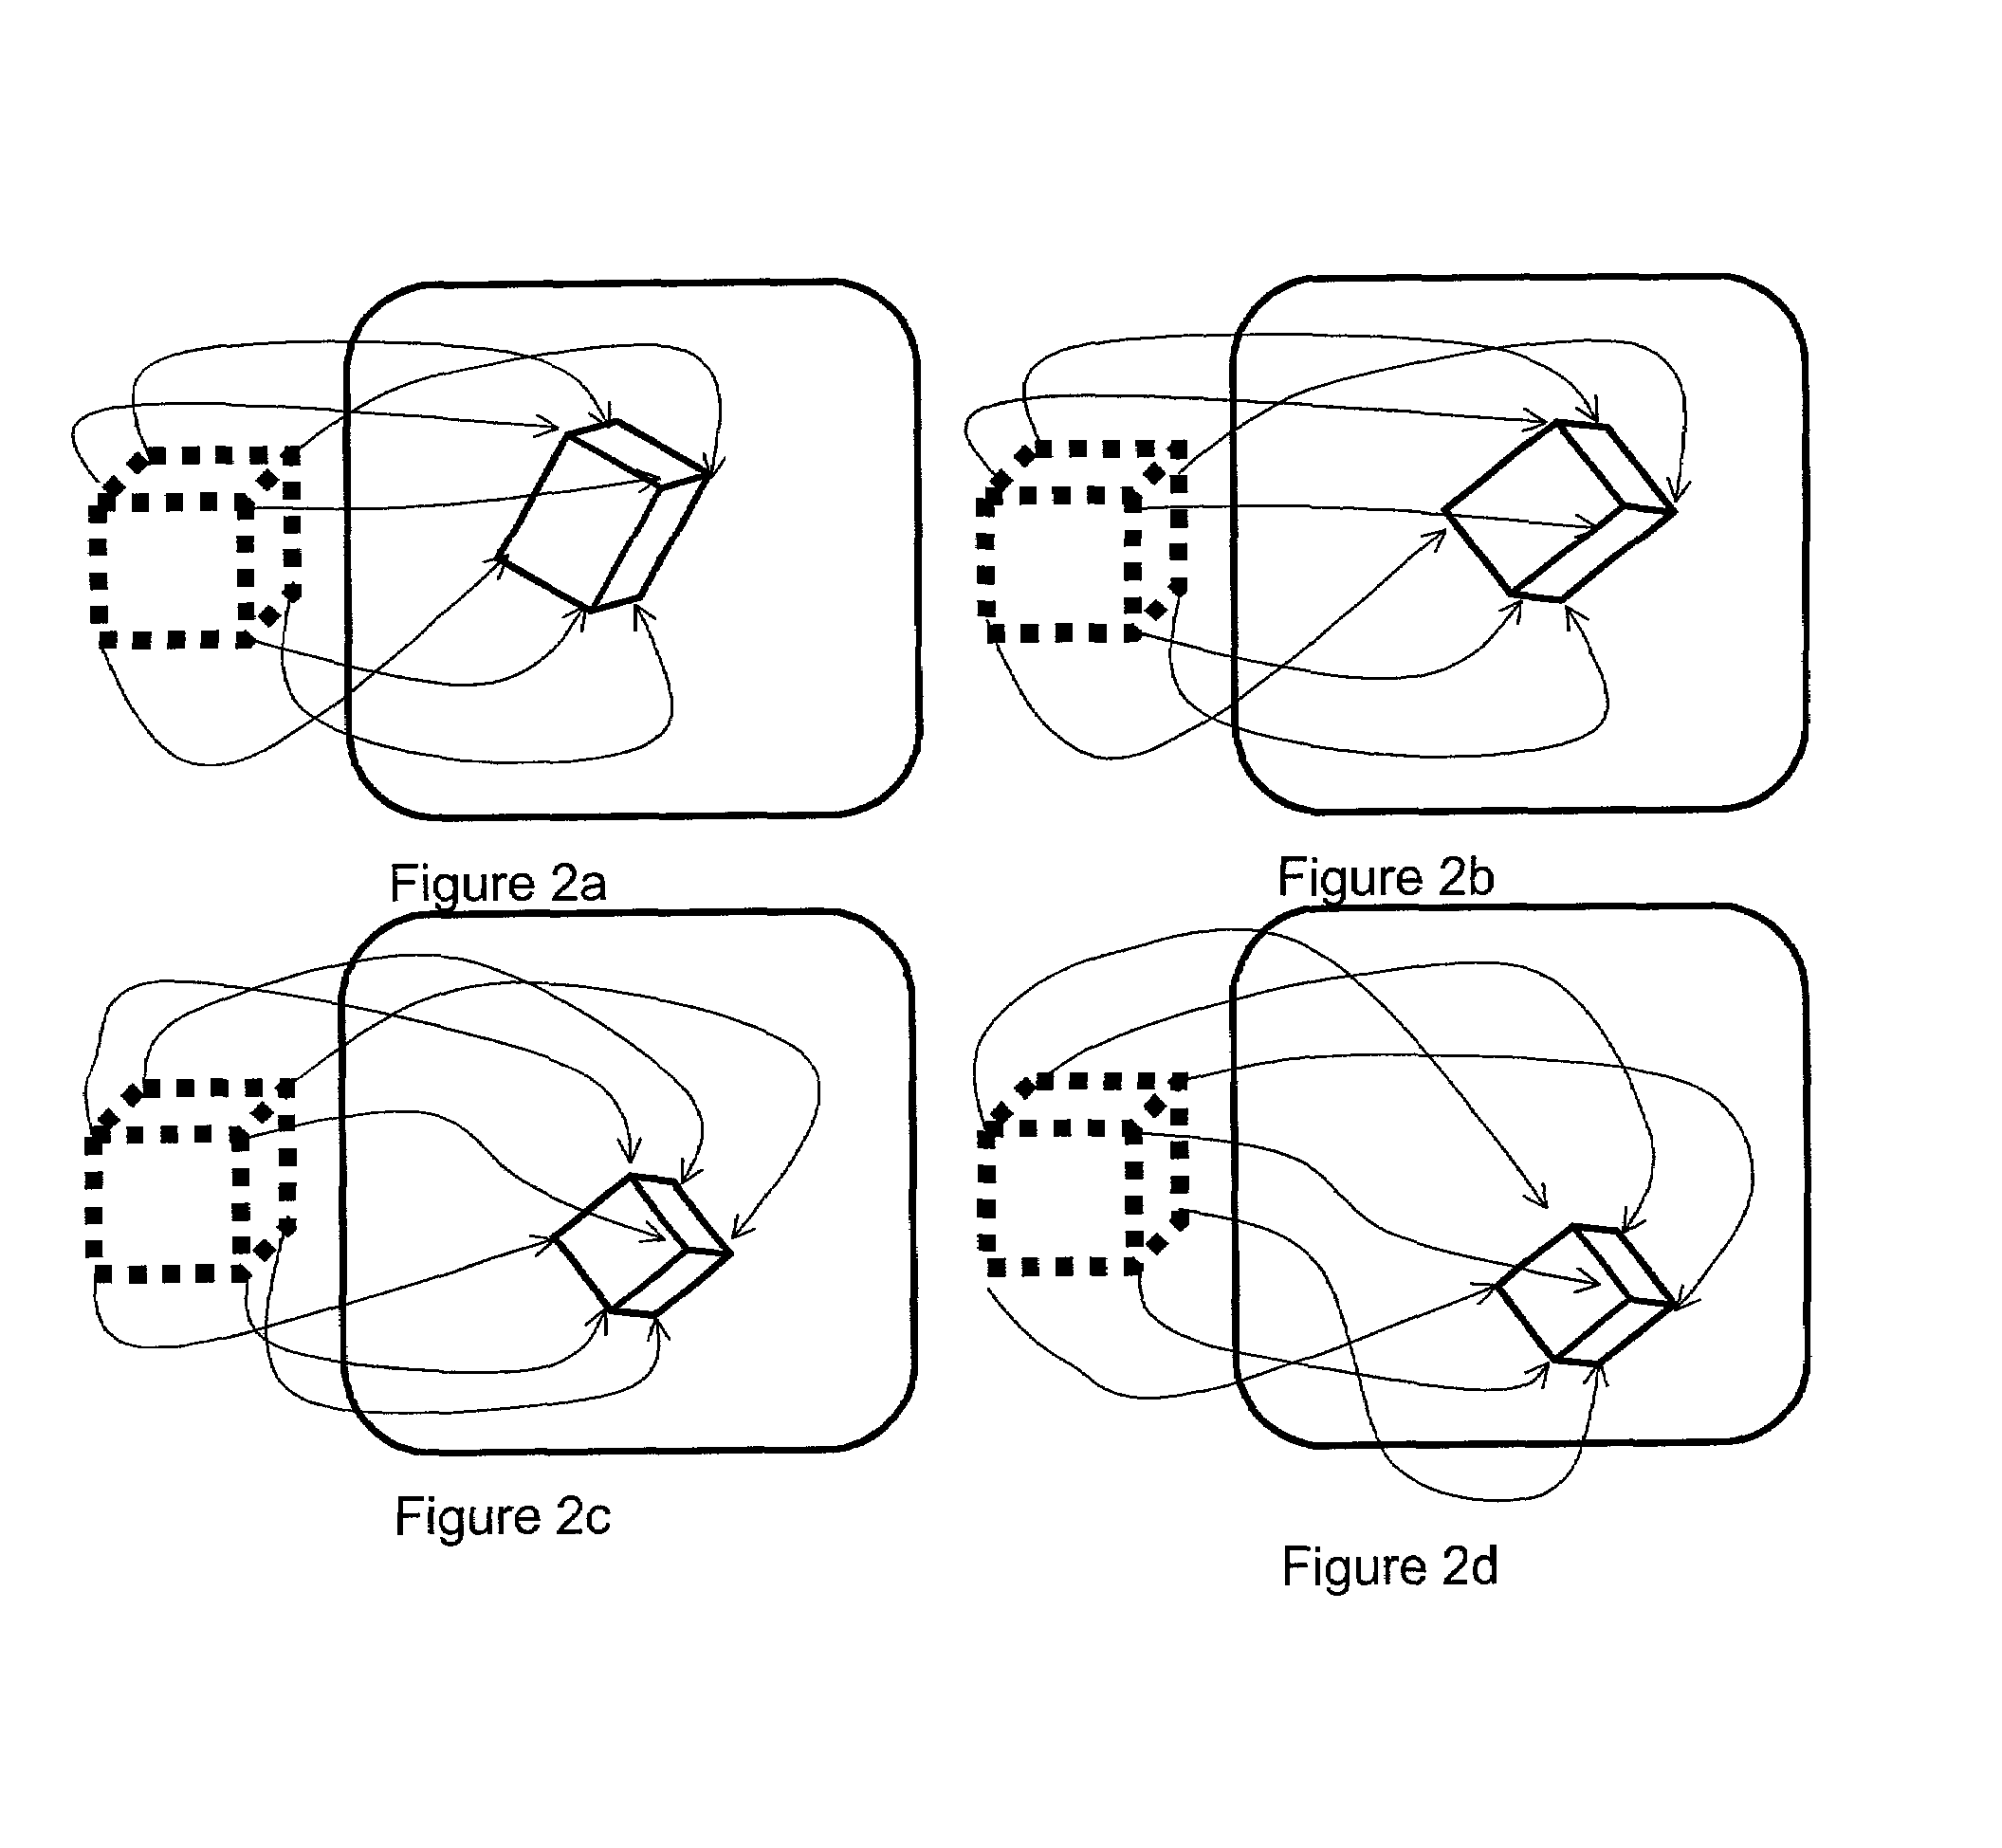 Coordinating haptics with visual images in a human-computer interface